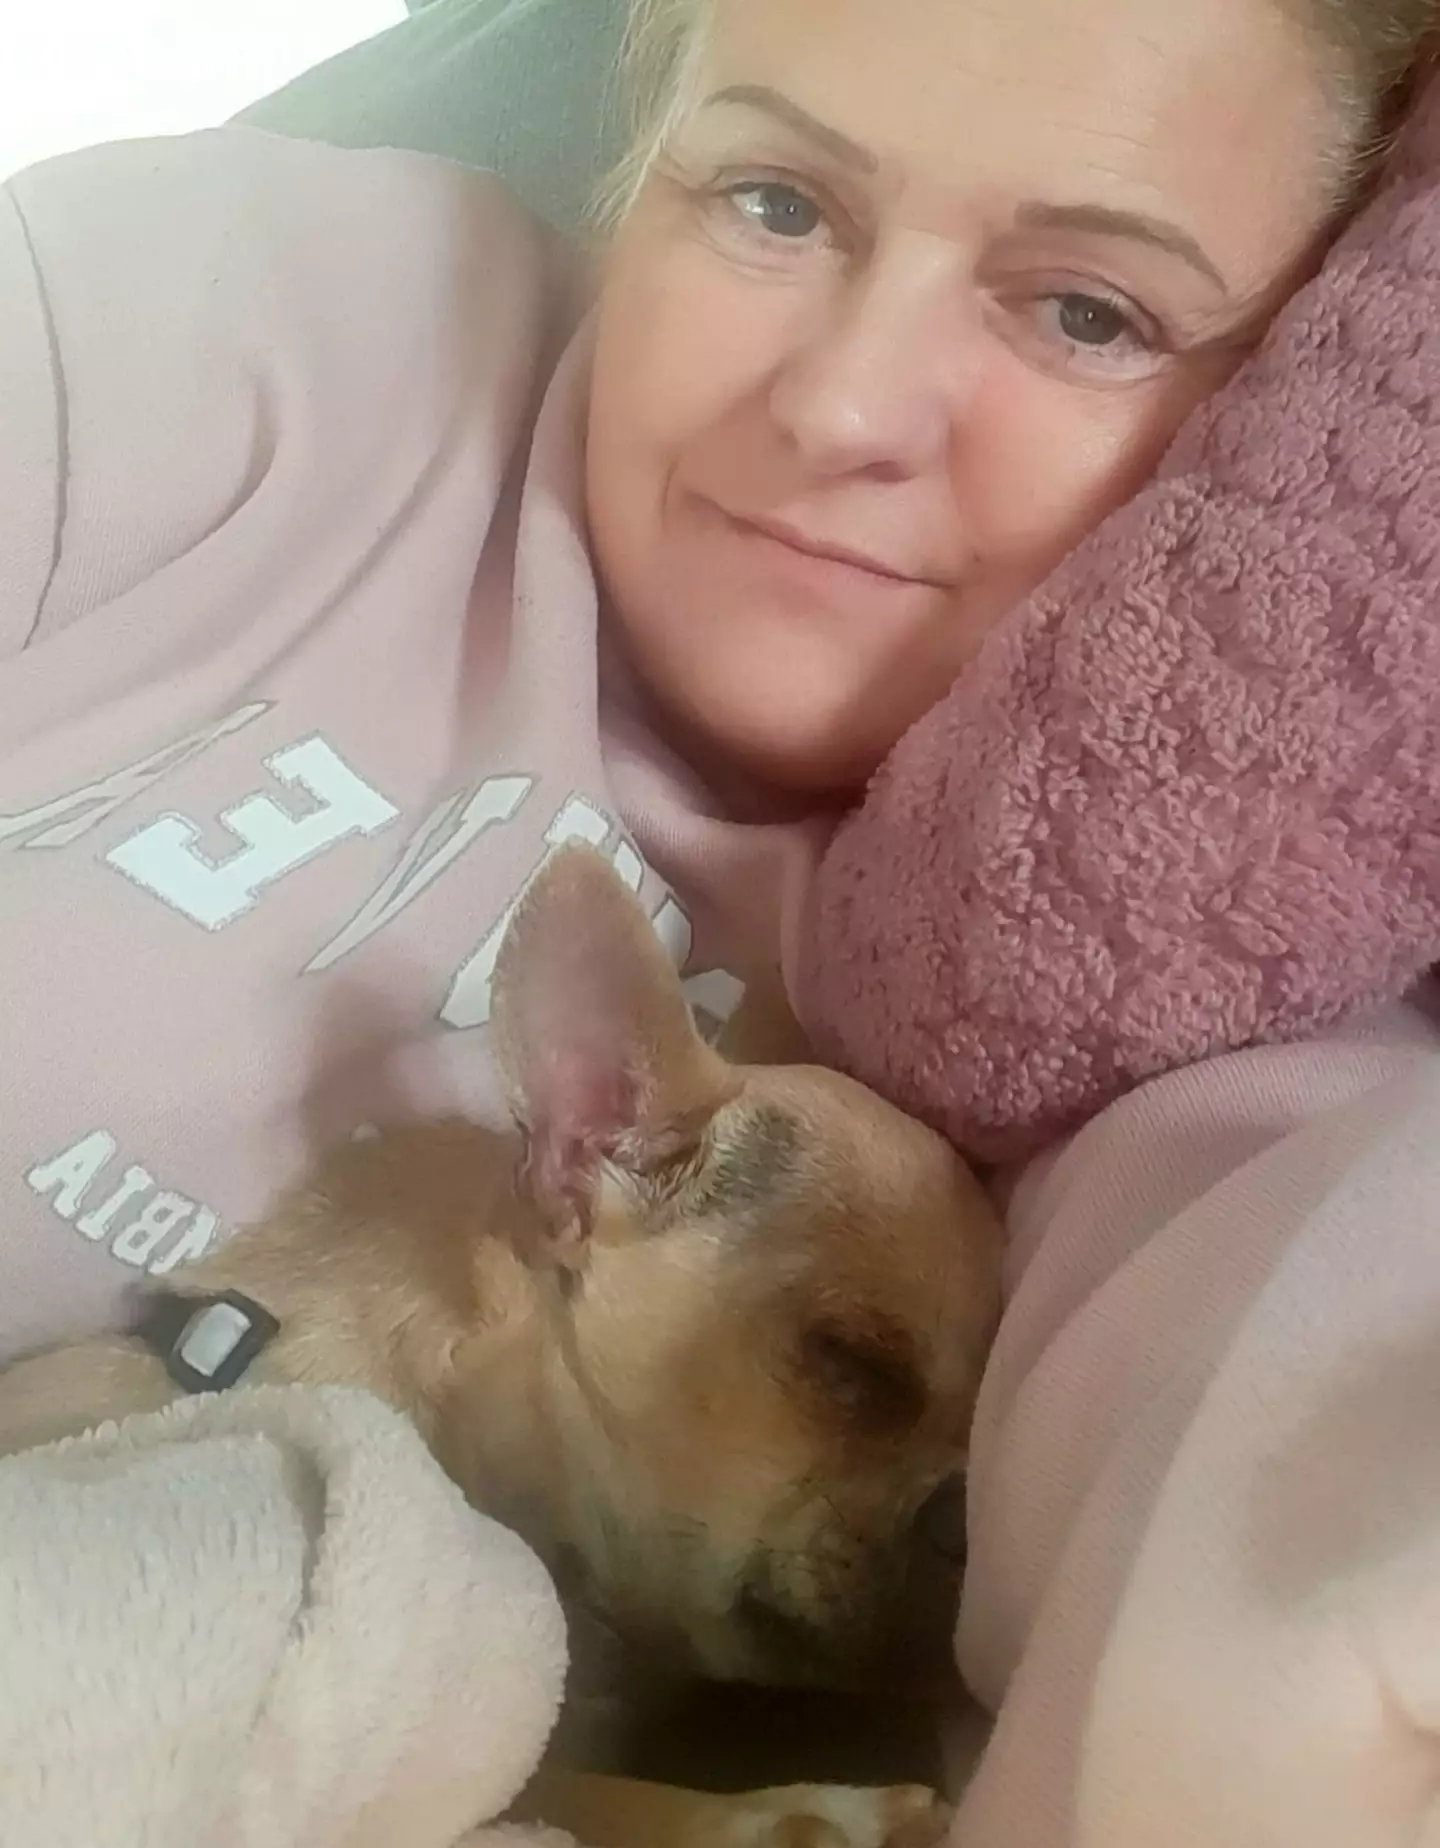 The woman and her dog were left suffering the same stomach bug.